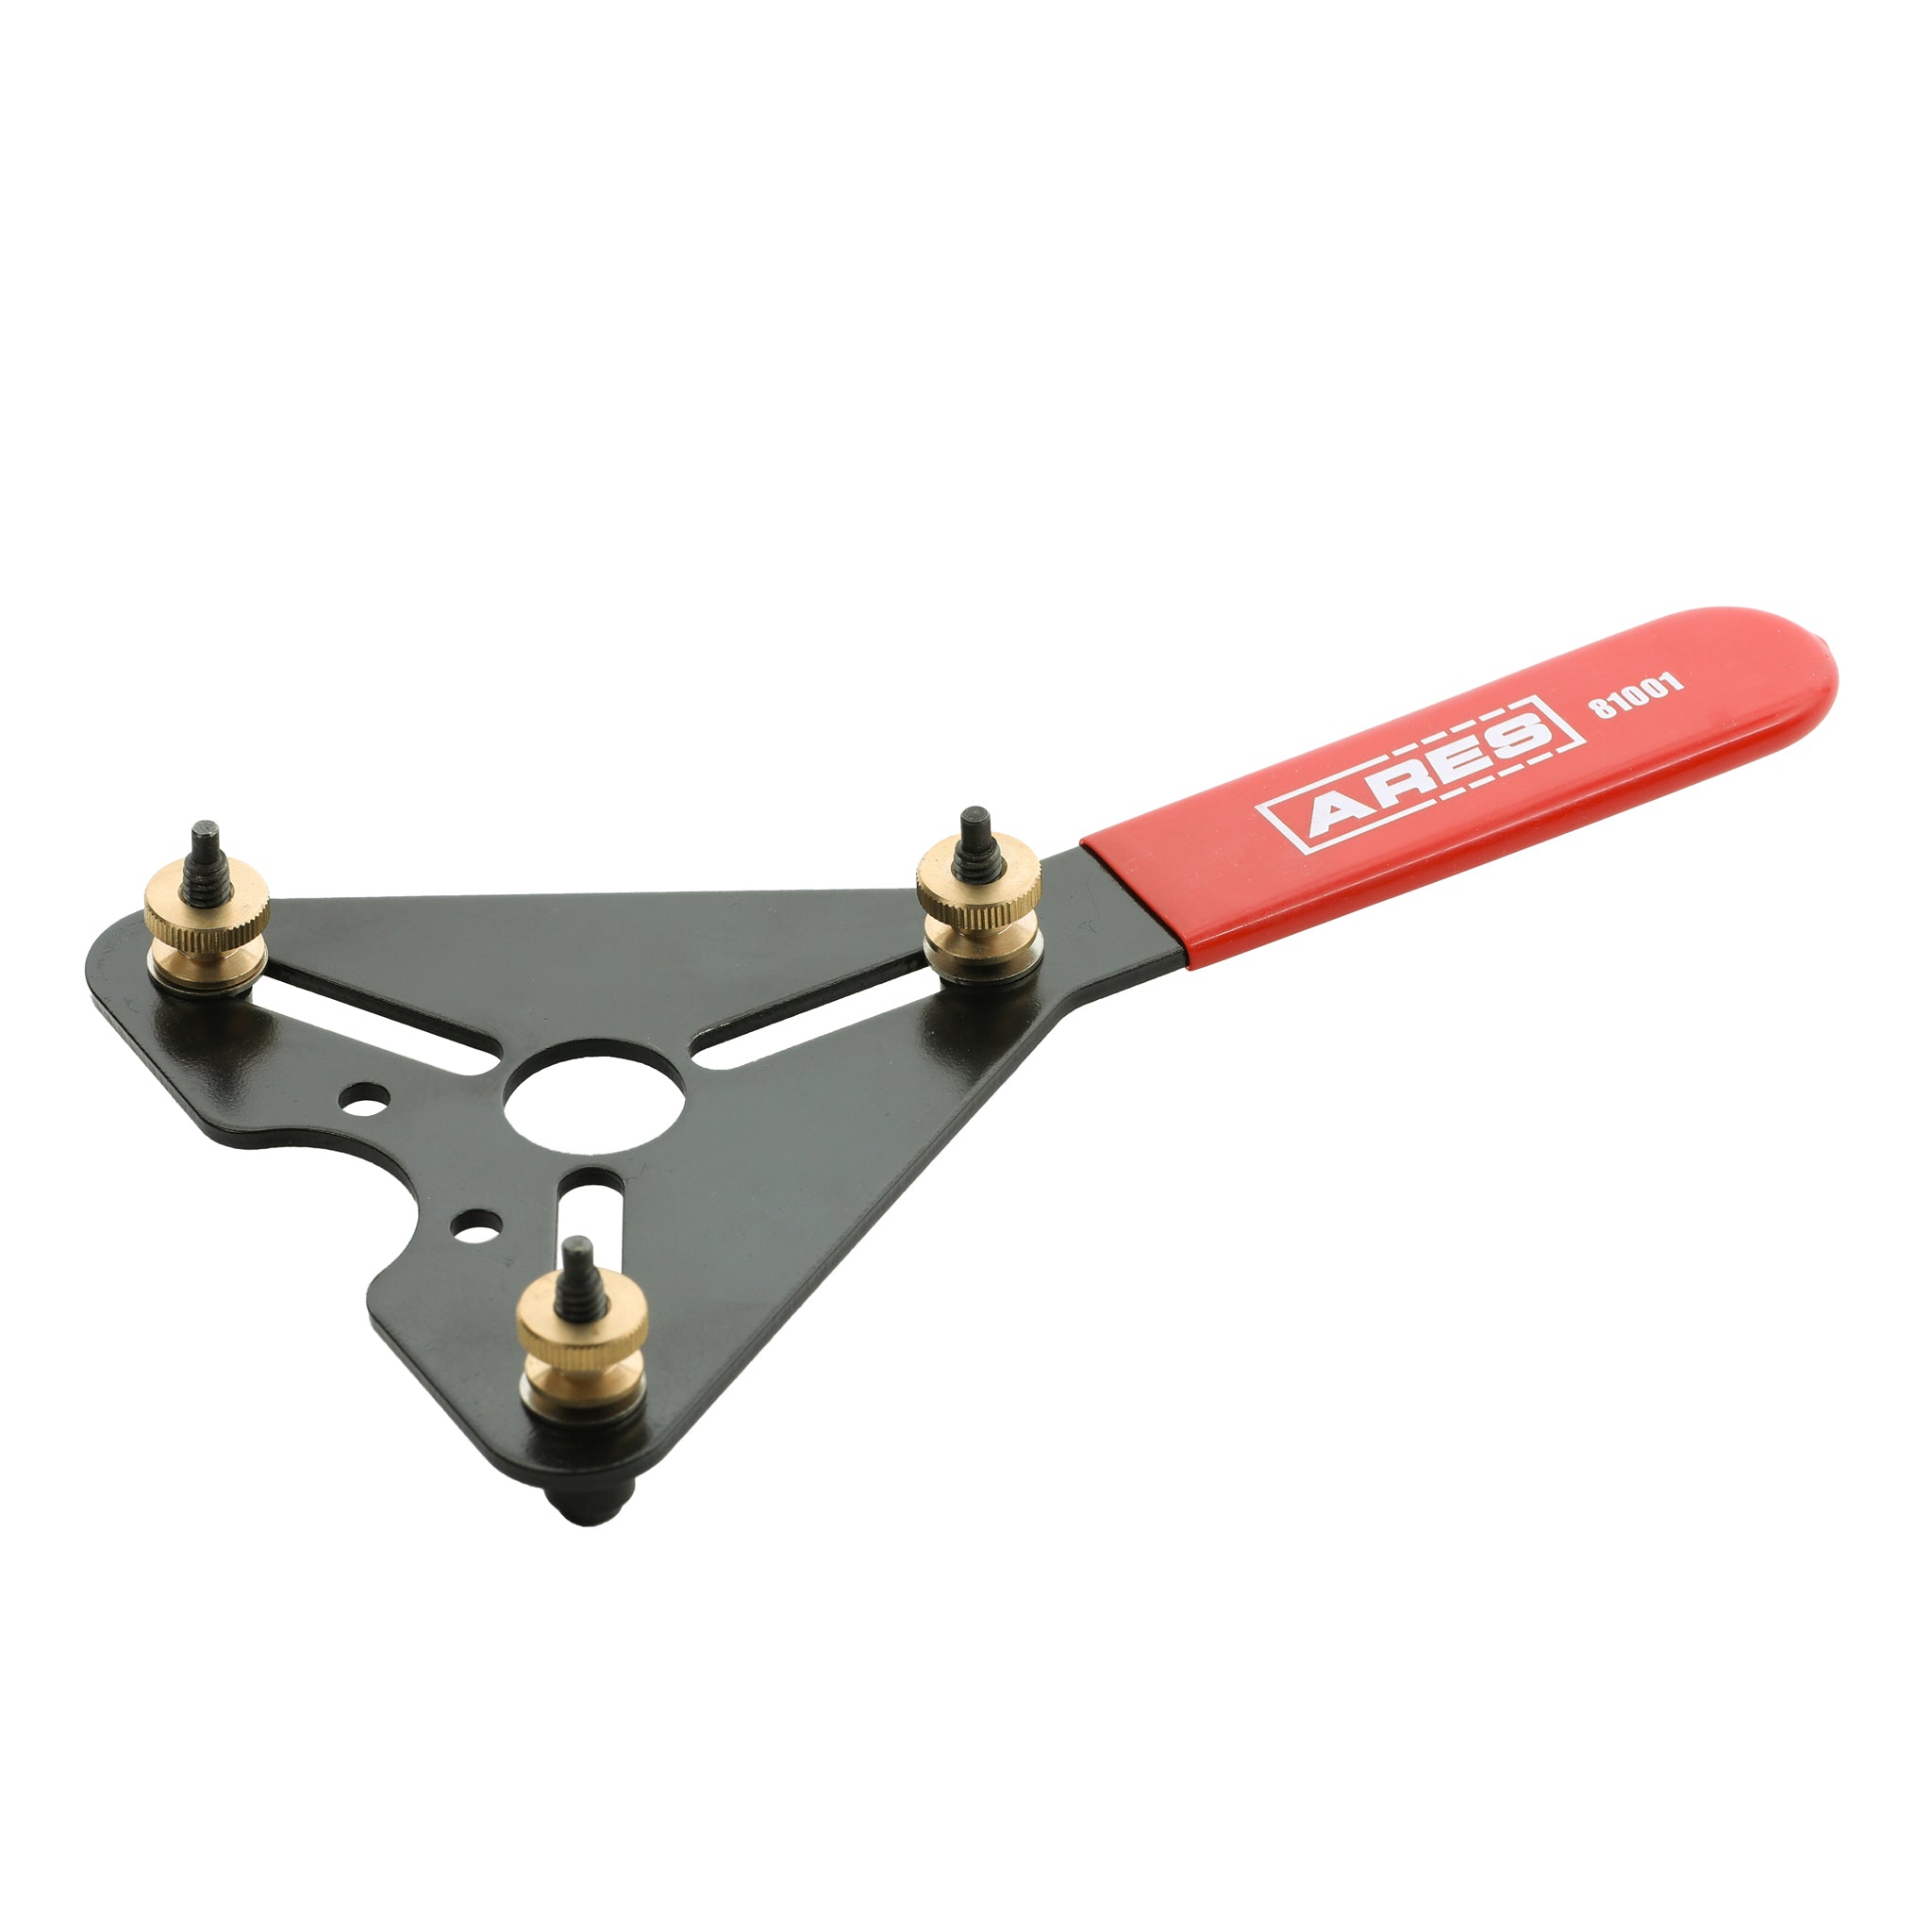 Fuel & Air Conditioning Line Disconnect Tool – ARES Tool, MJD